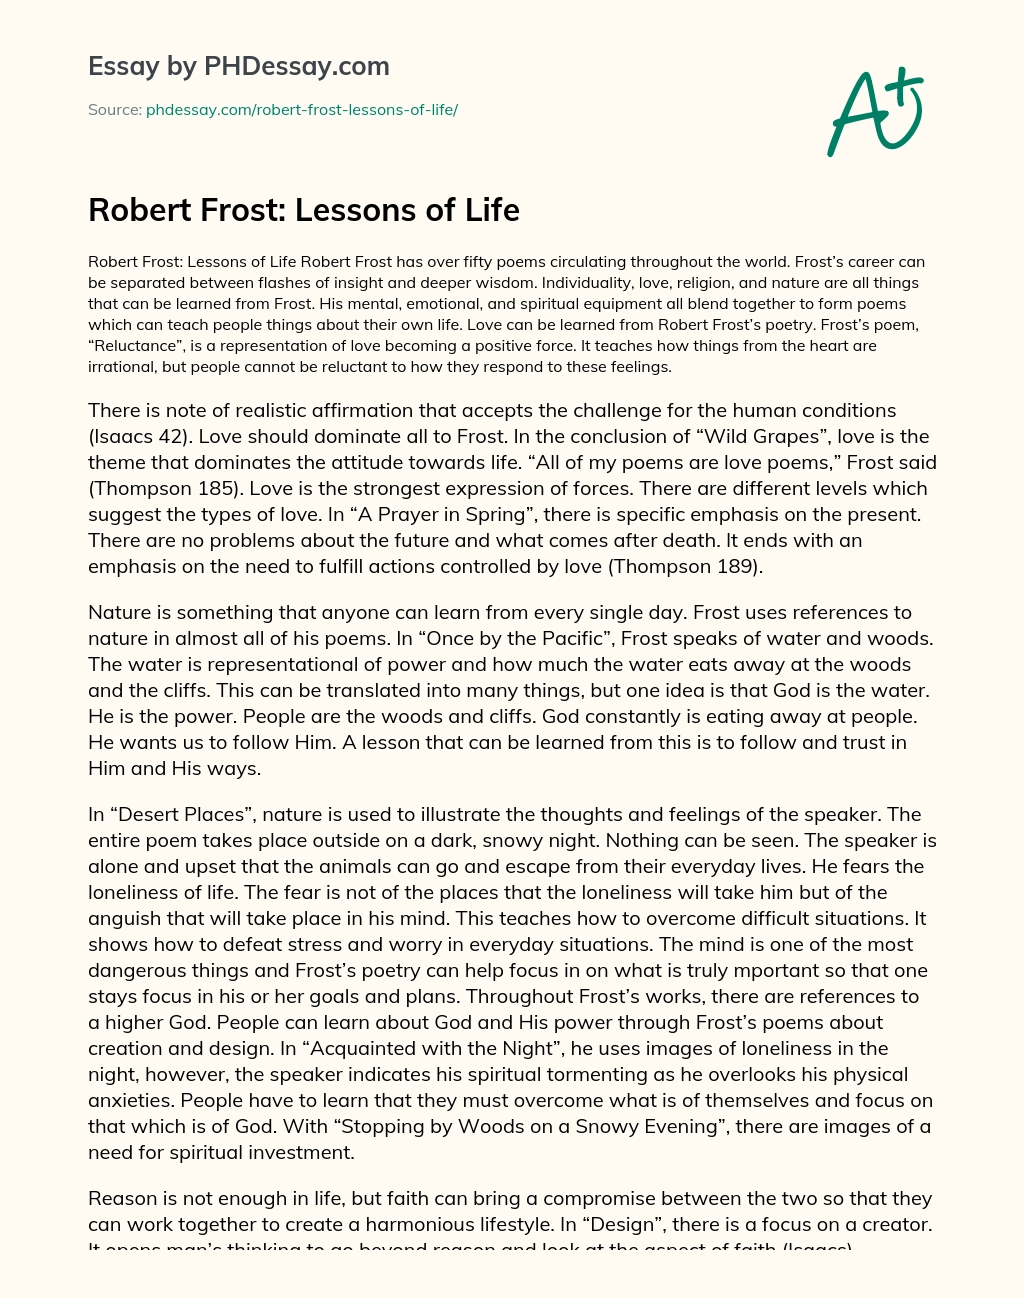 Robert Frost: Lessons of Life essay